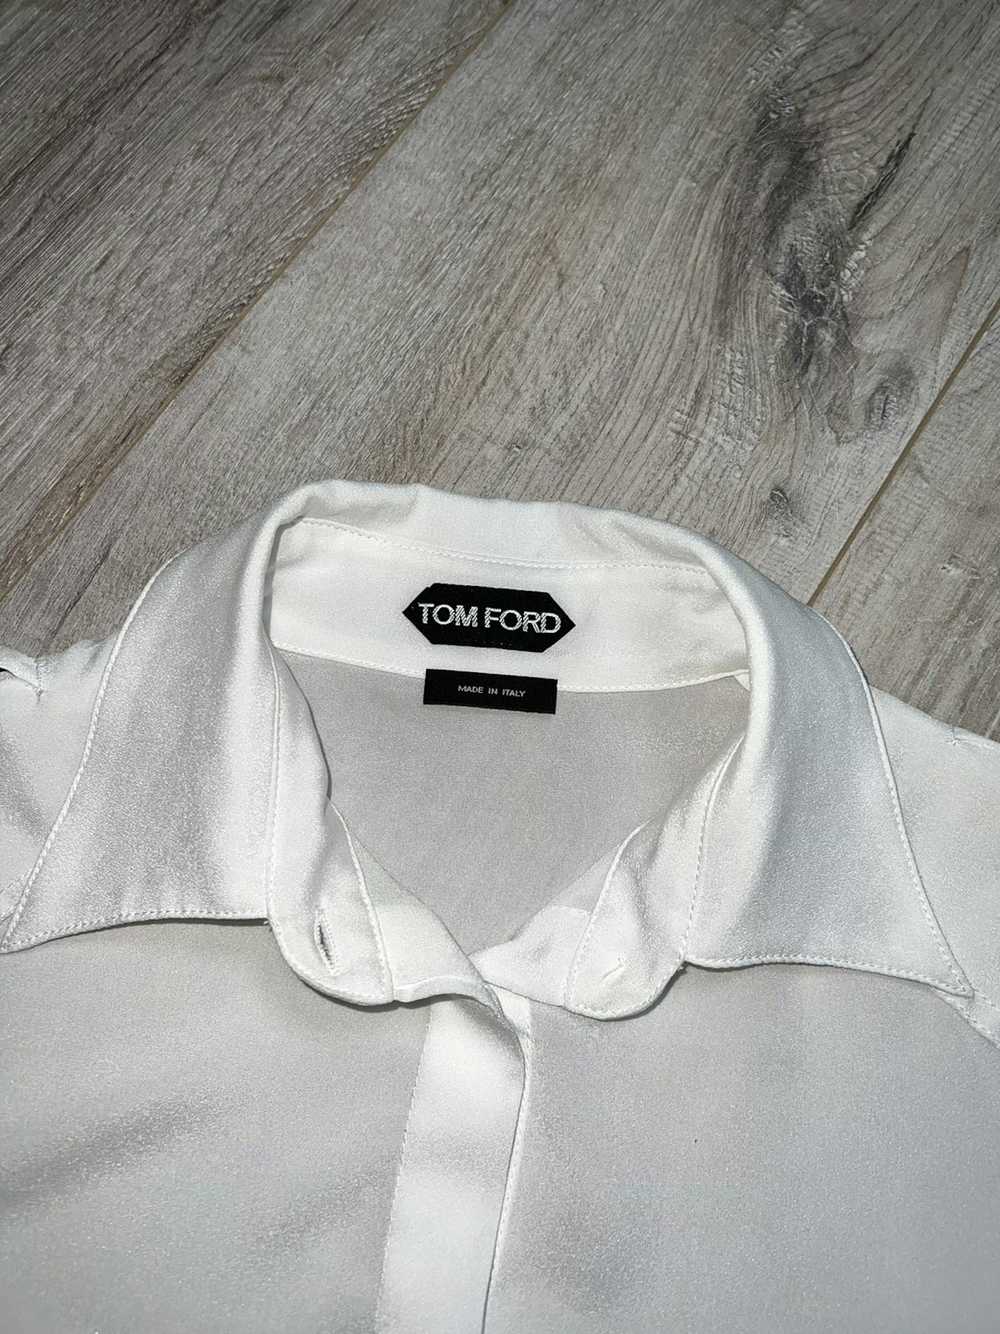 Gucci × Tom Ford TOM FORD Shirt Button Up Silk Po… - image 9